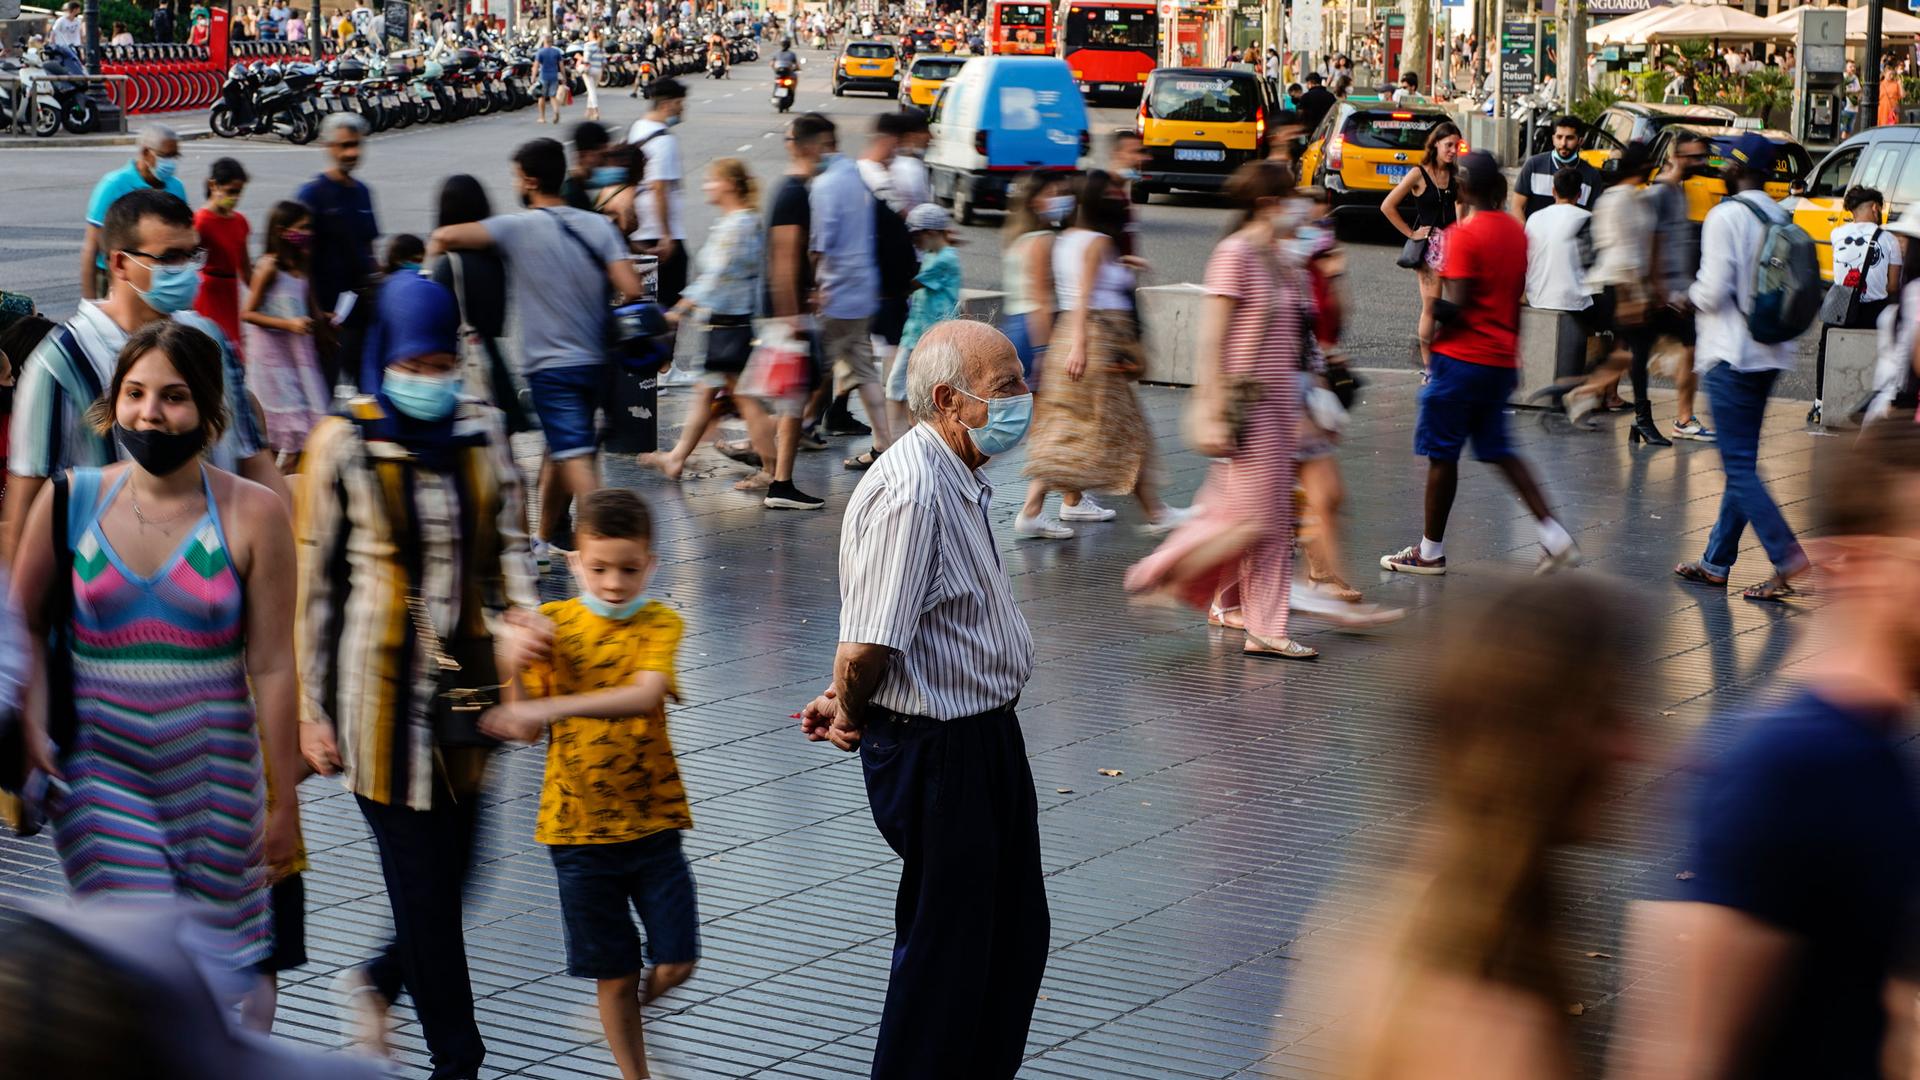 An older man is shown standing still in a crowded sideway area with people walking past him in blurred motion.